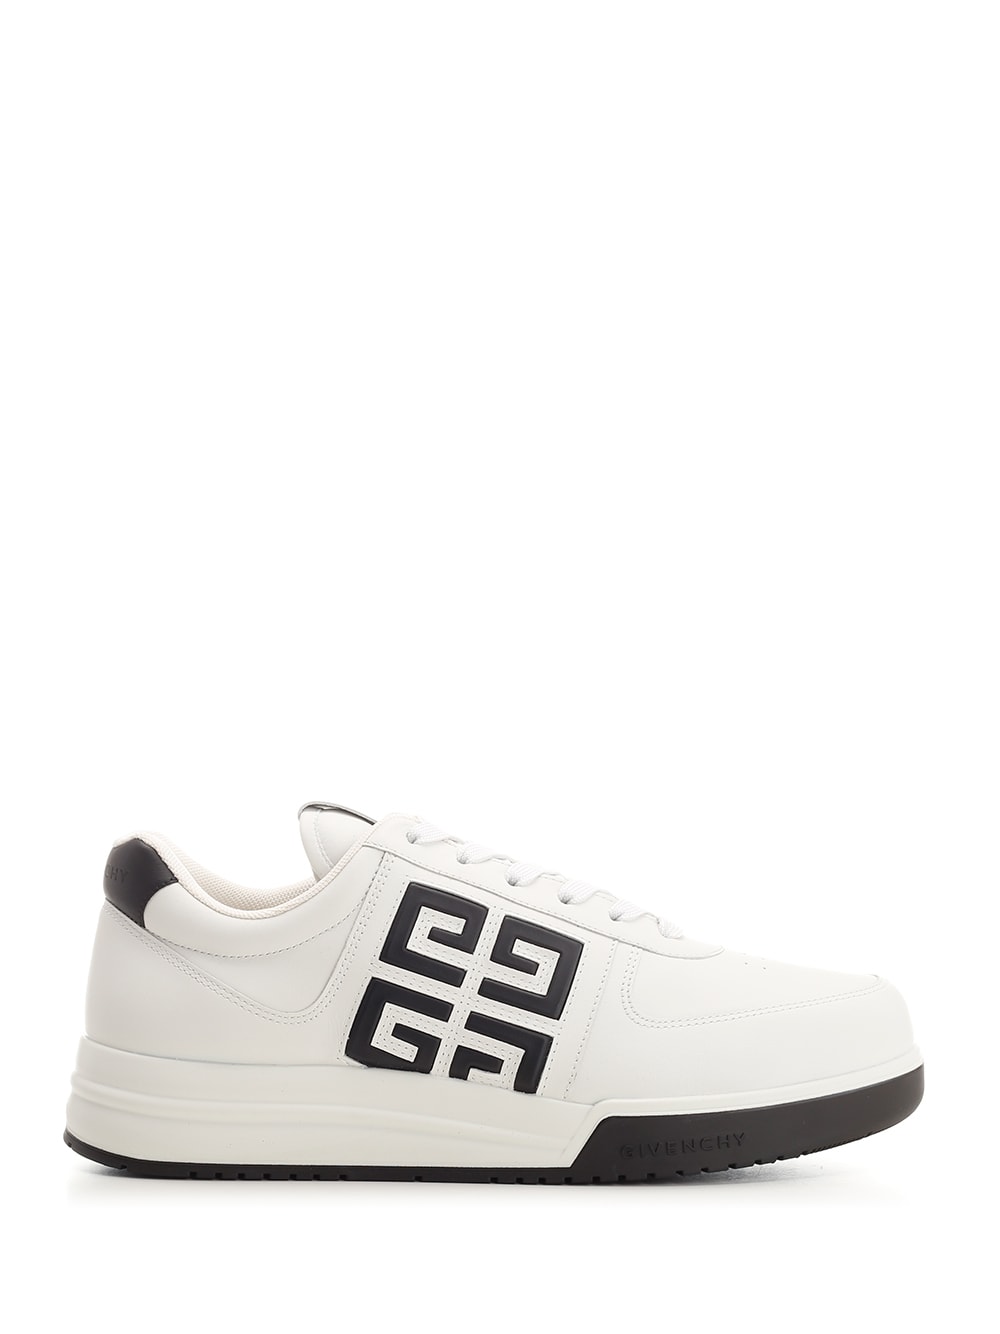 Shop Givenchy White/black G4 Sneakers